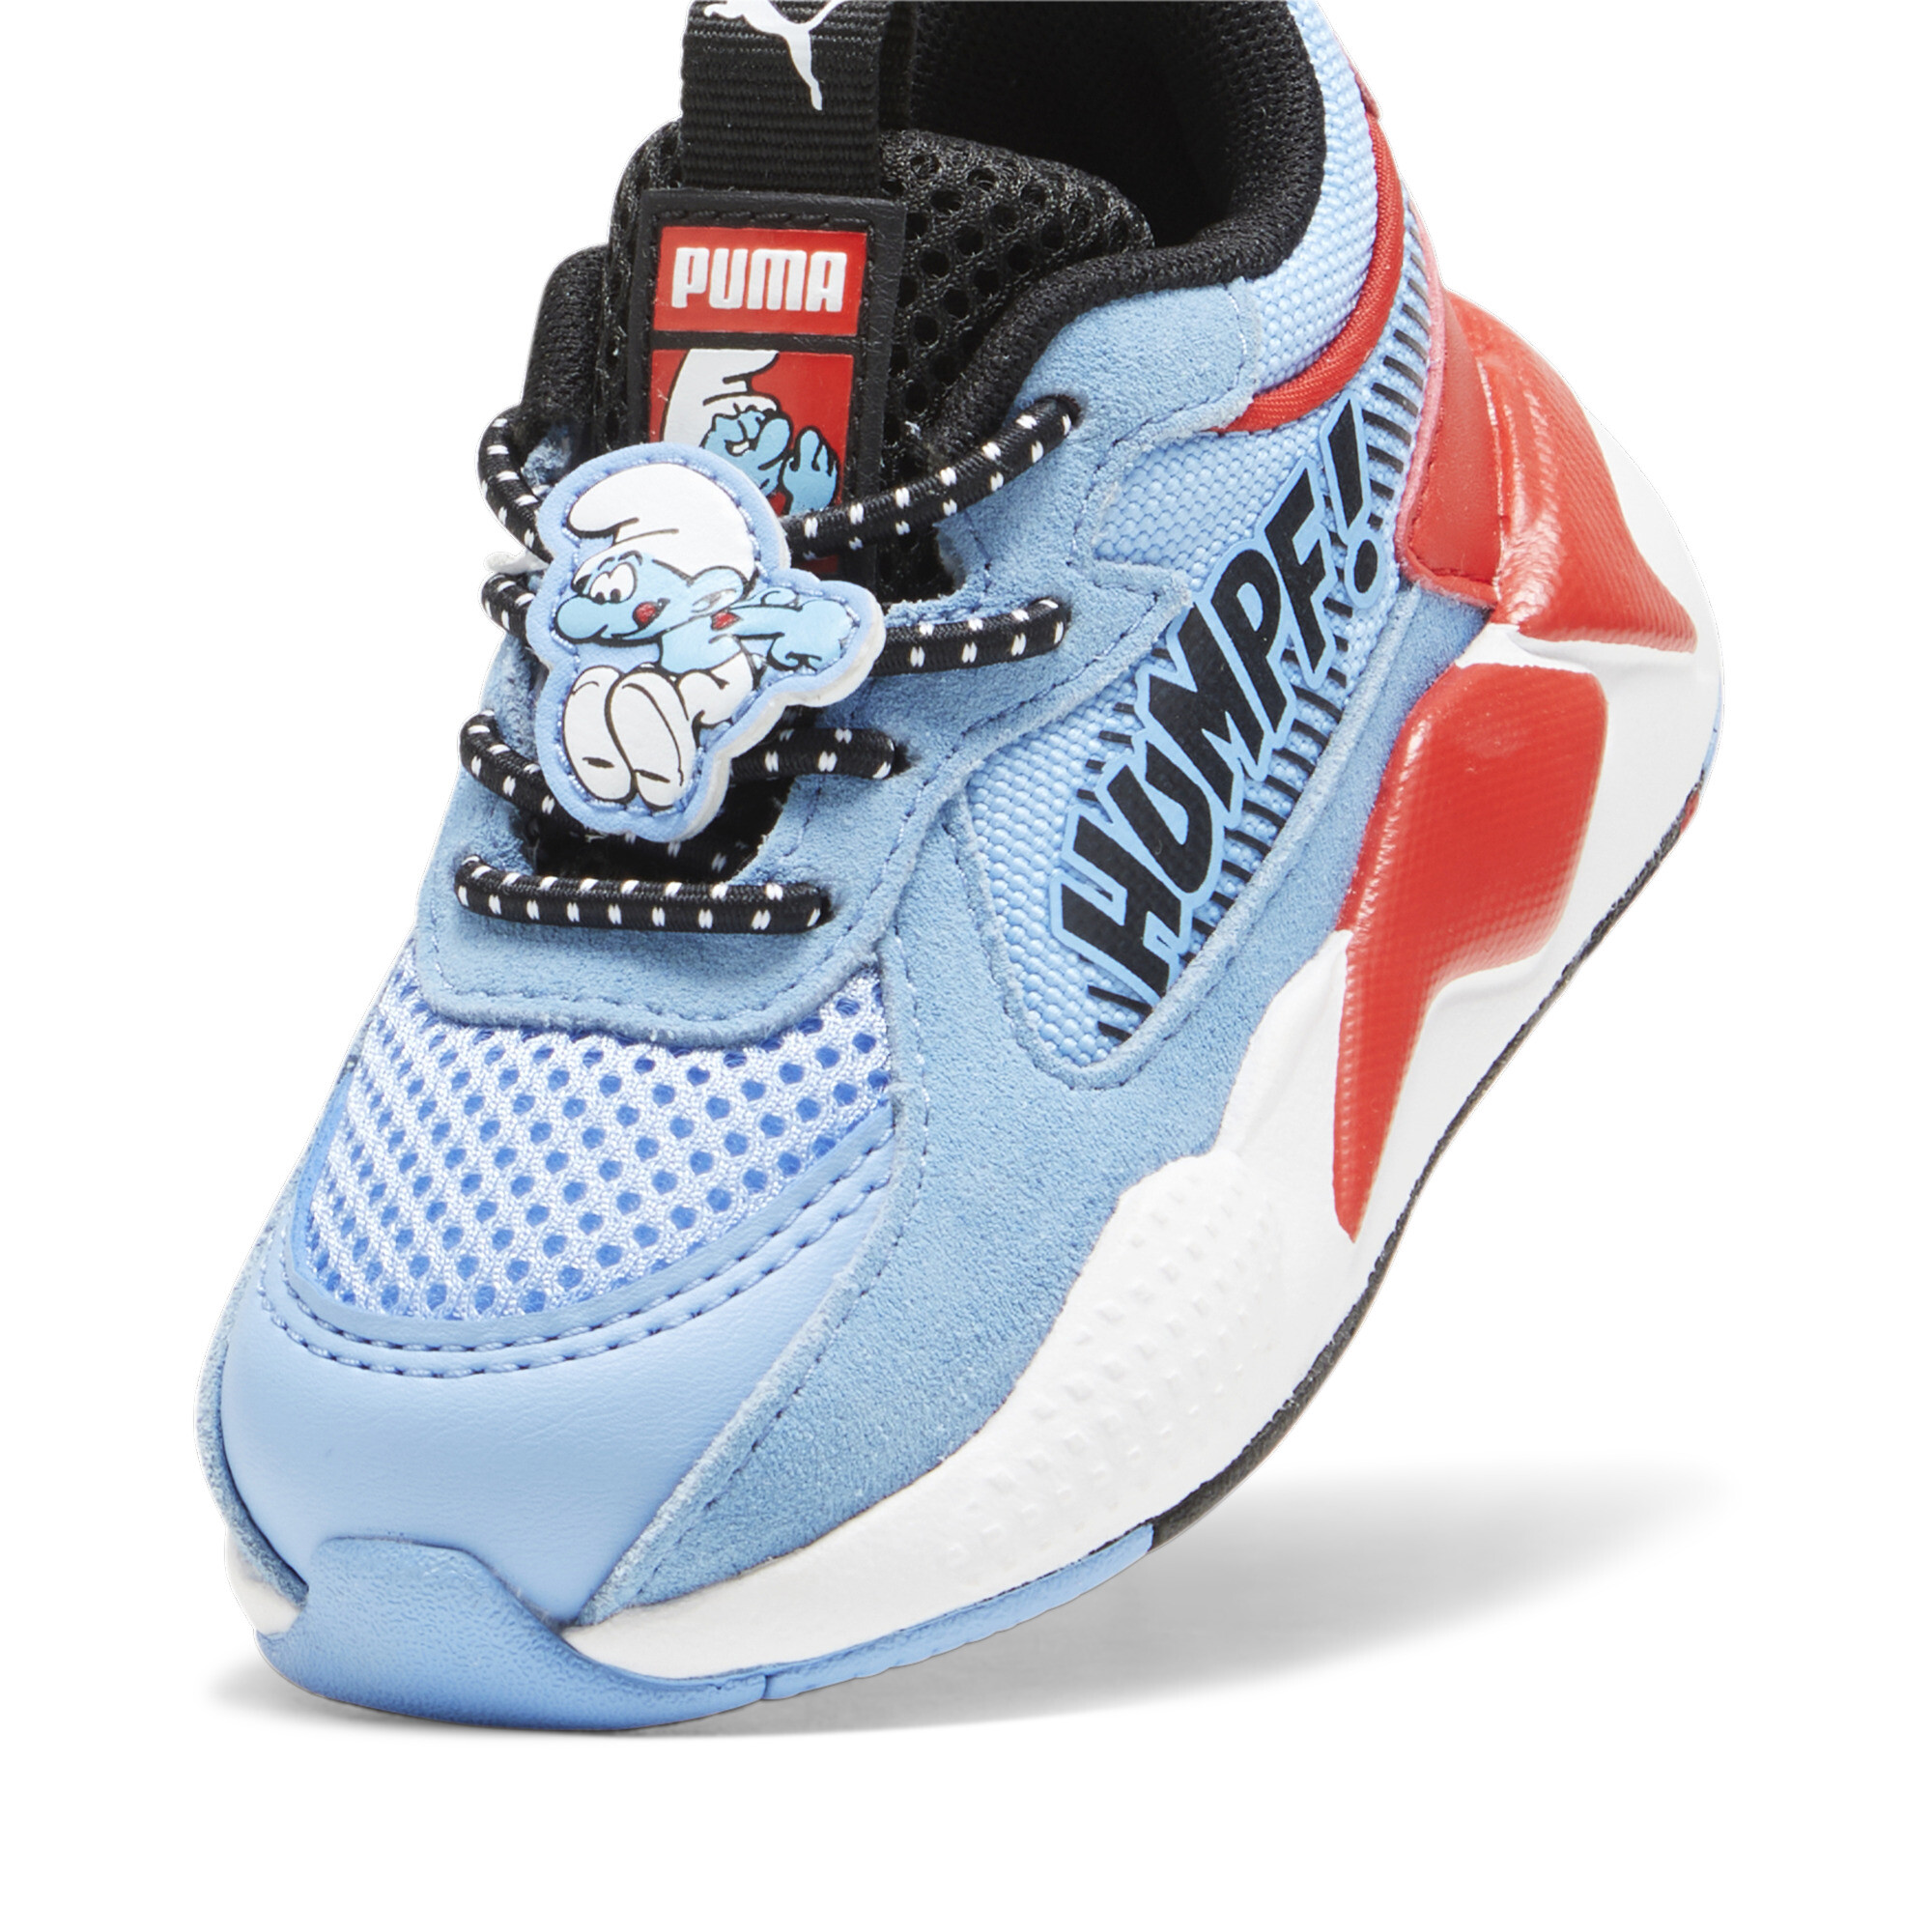 Puma X THE SMURFS RS-X Toddlers' Sneakers, Blue, Size 23, Shoes